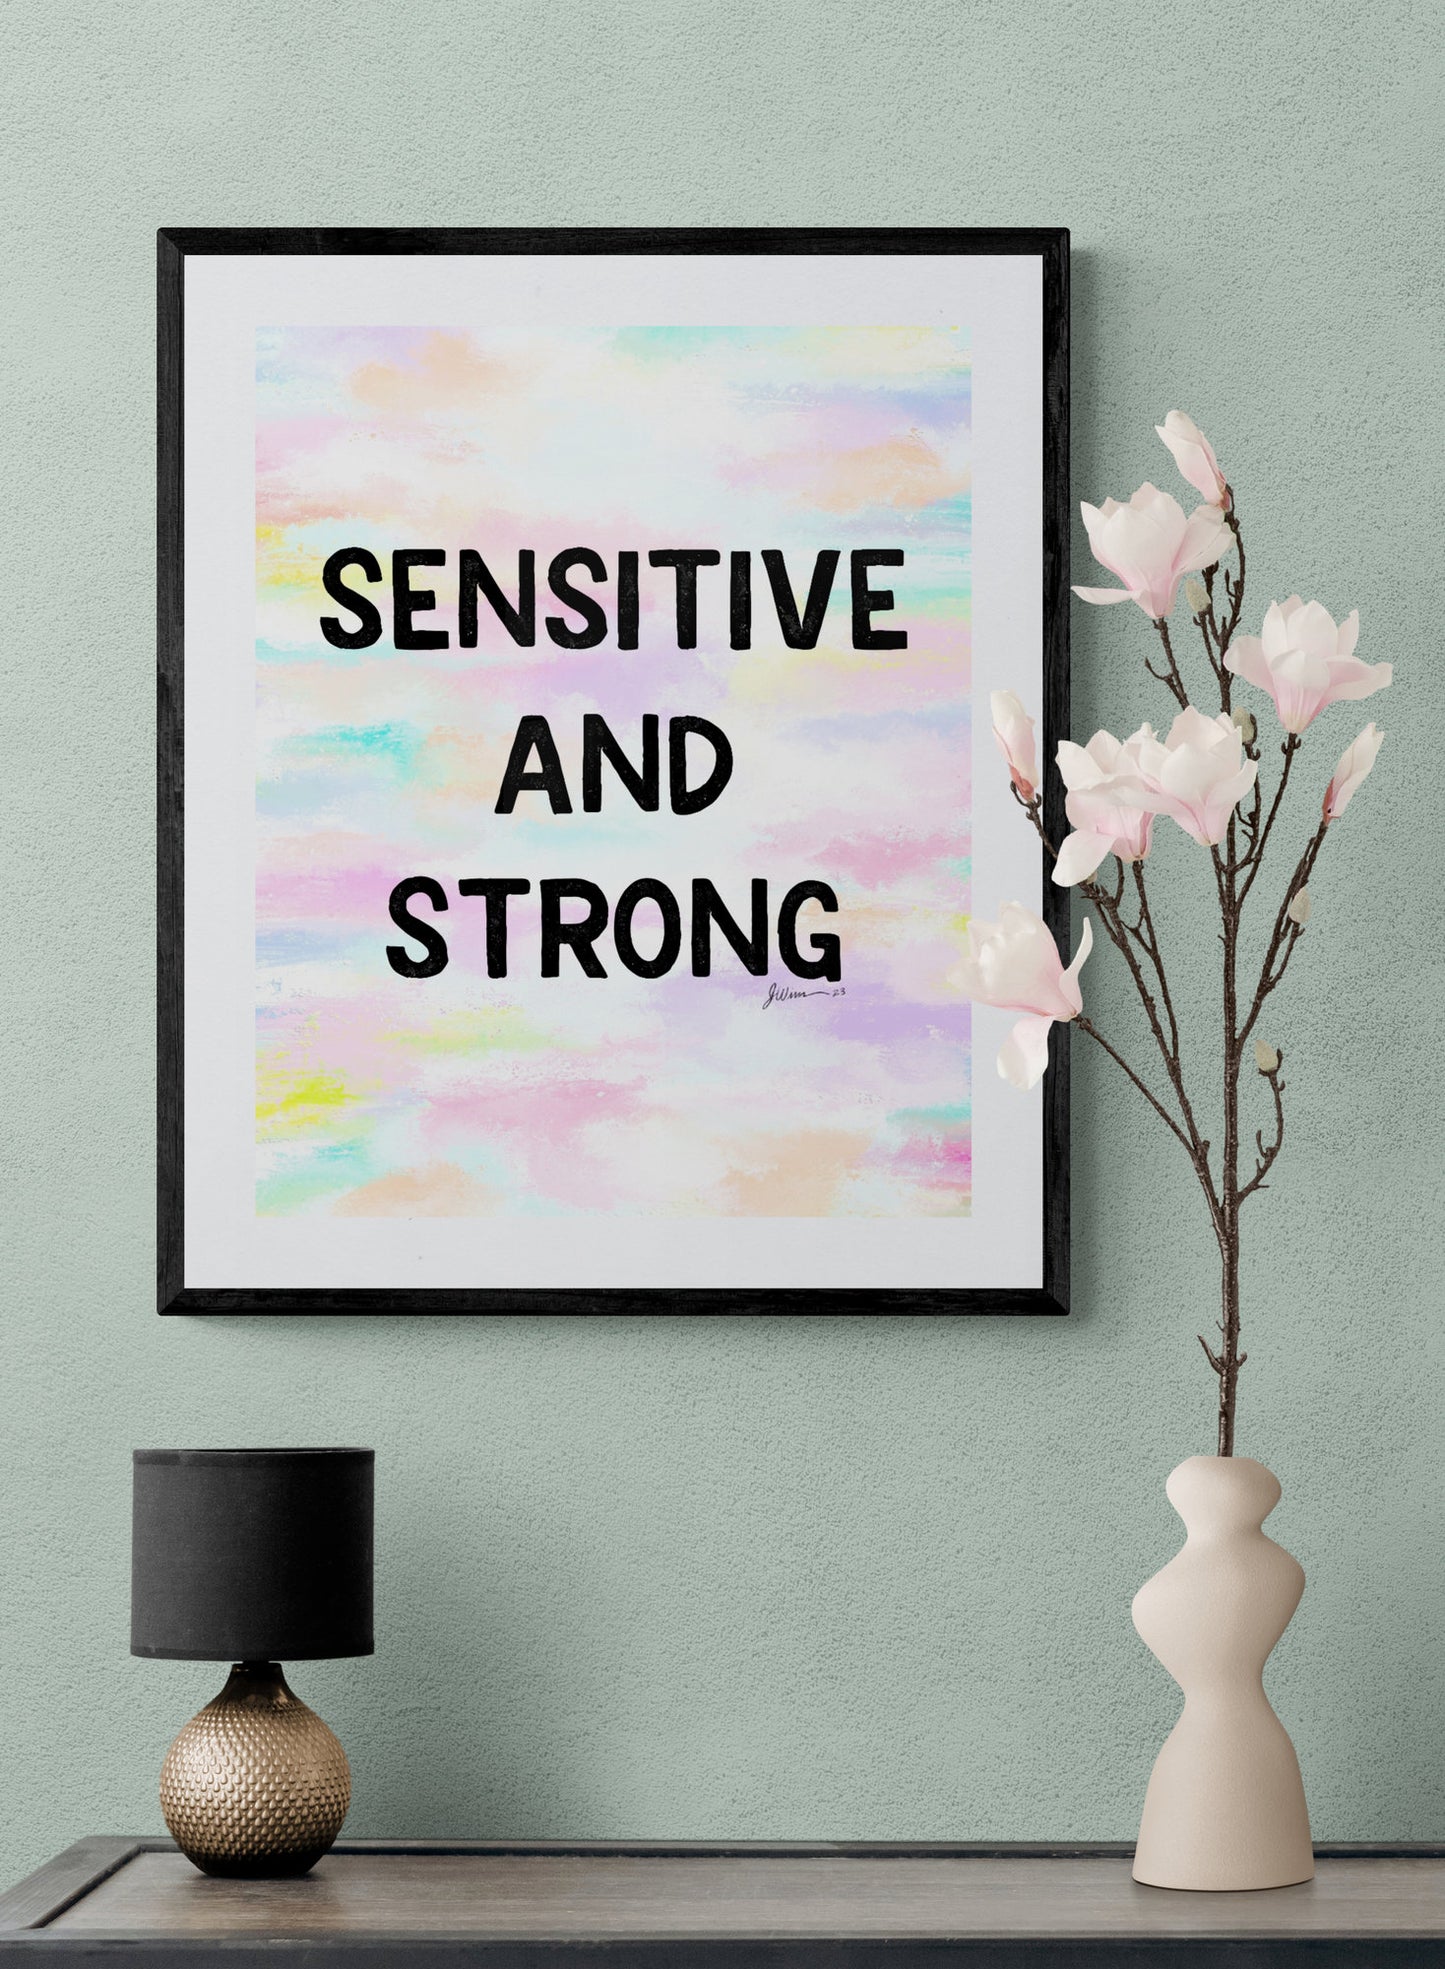 Sensitive and Strong Inspirational Giclée Art Print 8” x 10” with Colorful Abstract Background